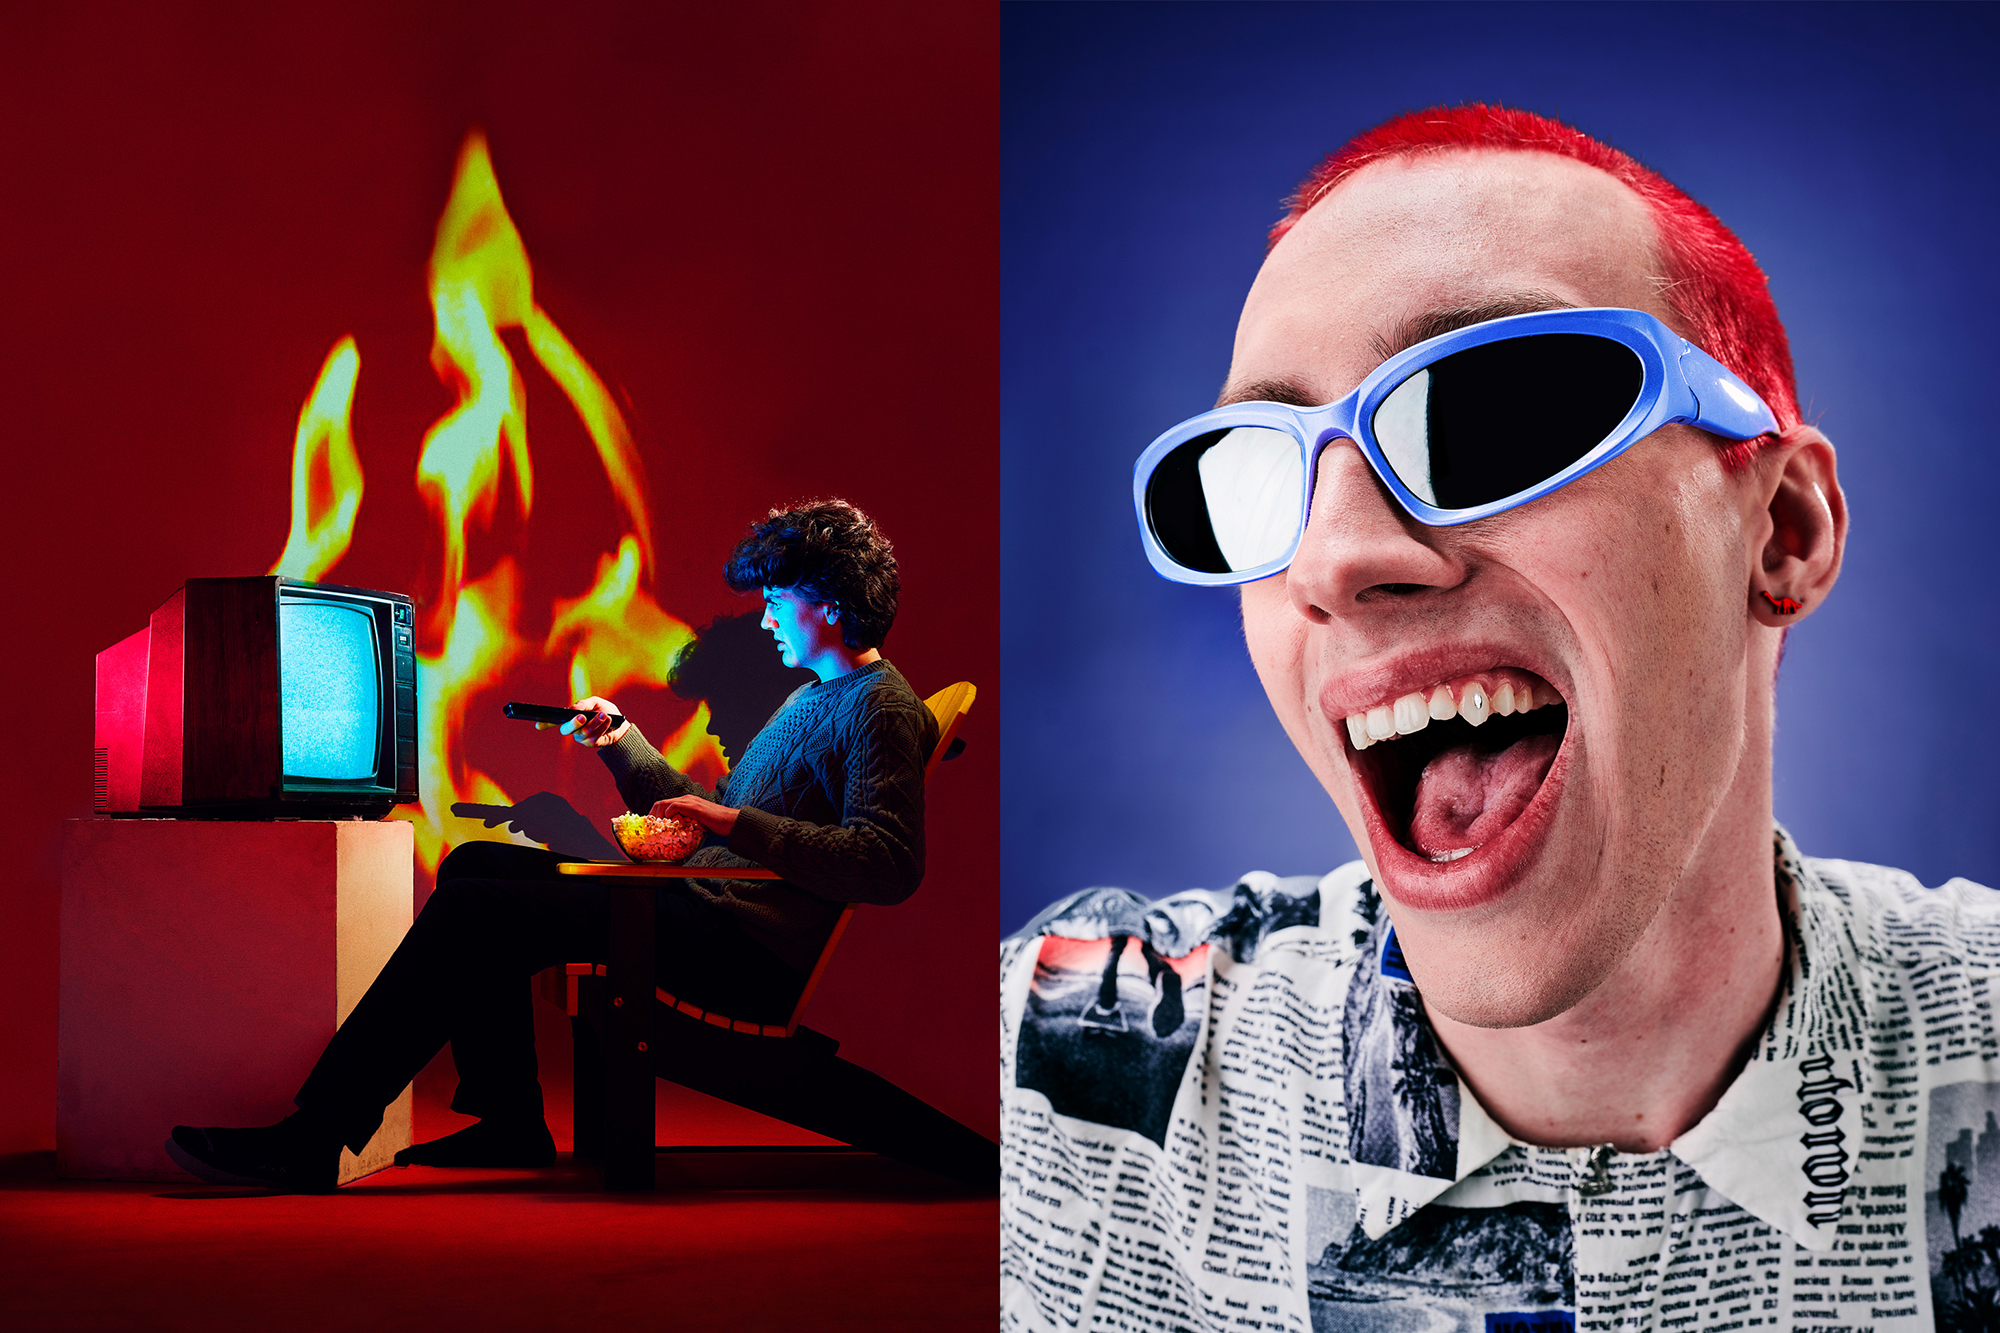 Side by side photos of a person watching TV with fire in the background and a close-up portrait of a person with red hair and sunglasses.